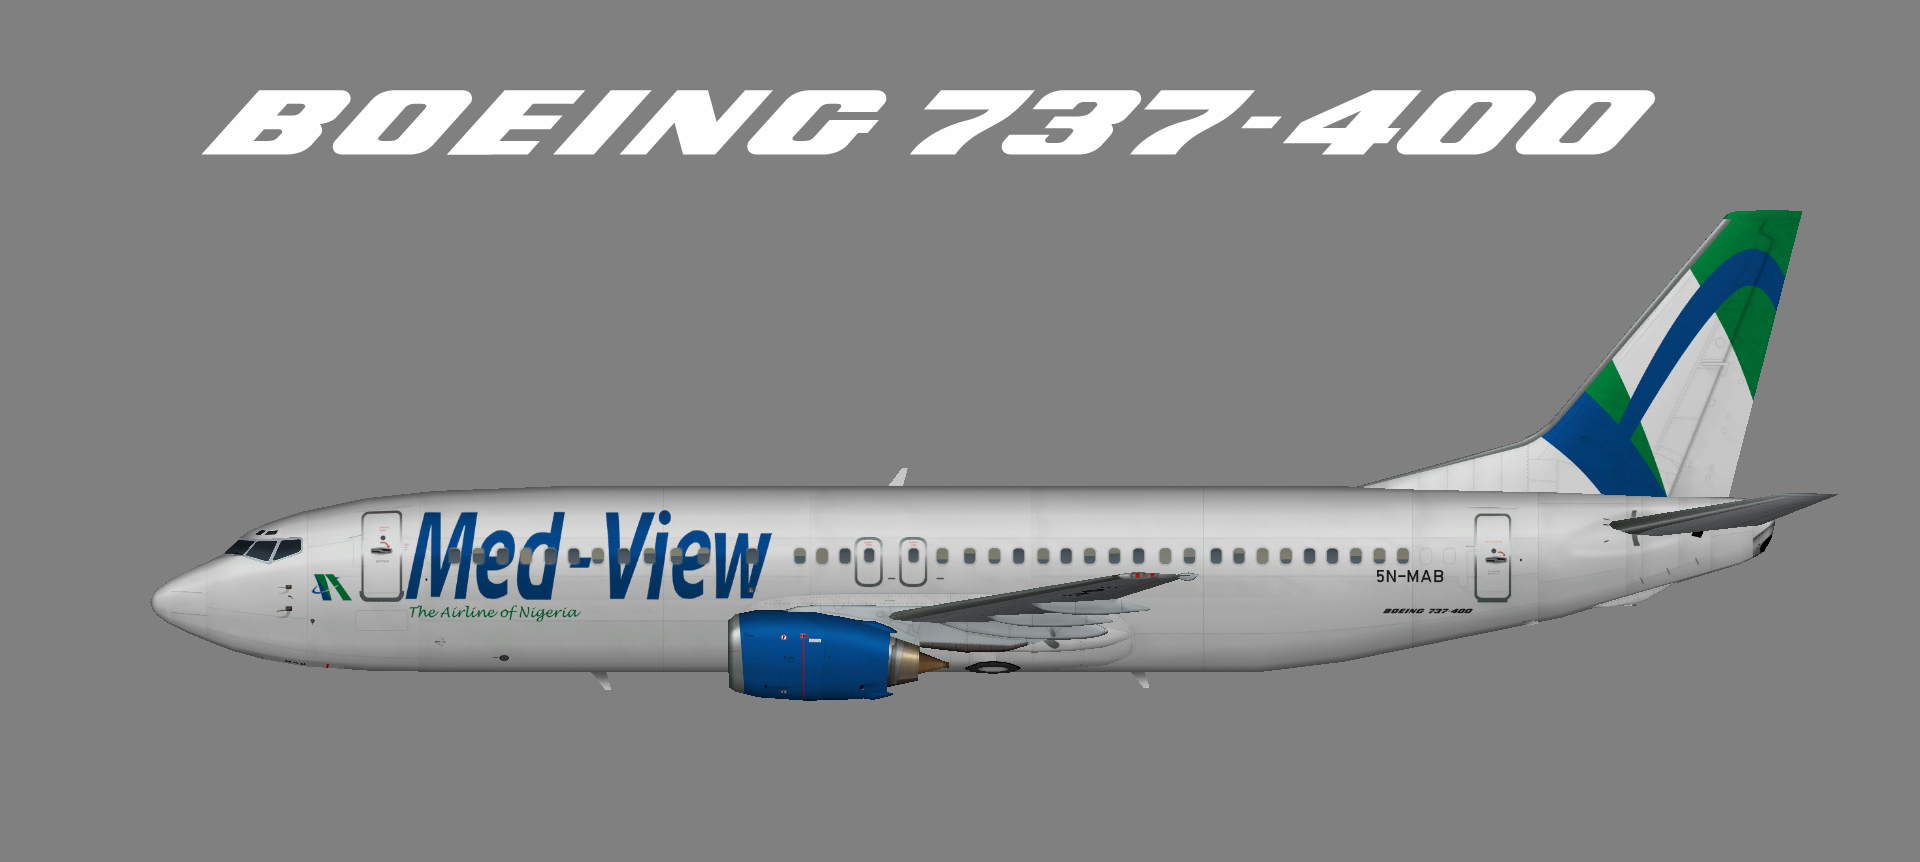 Med-View Airline 737-400